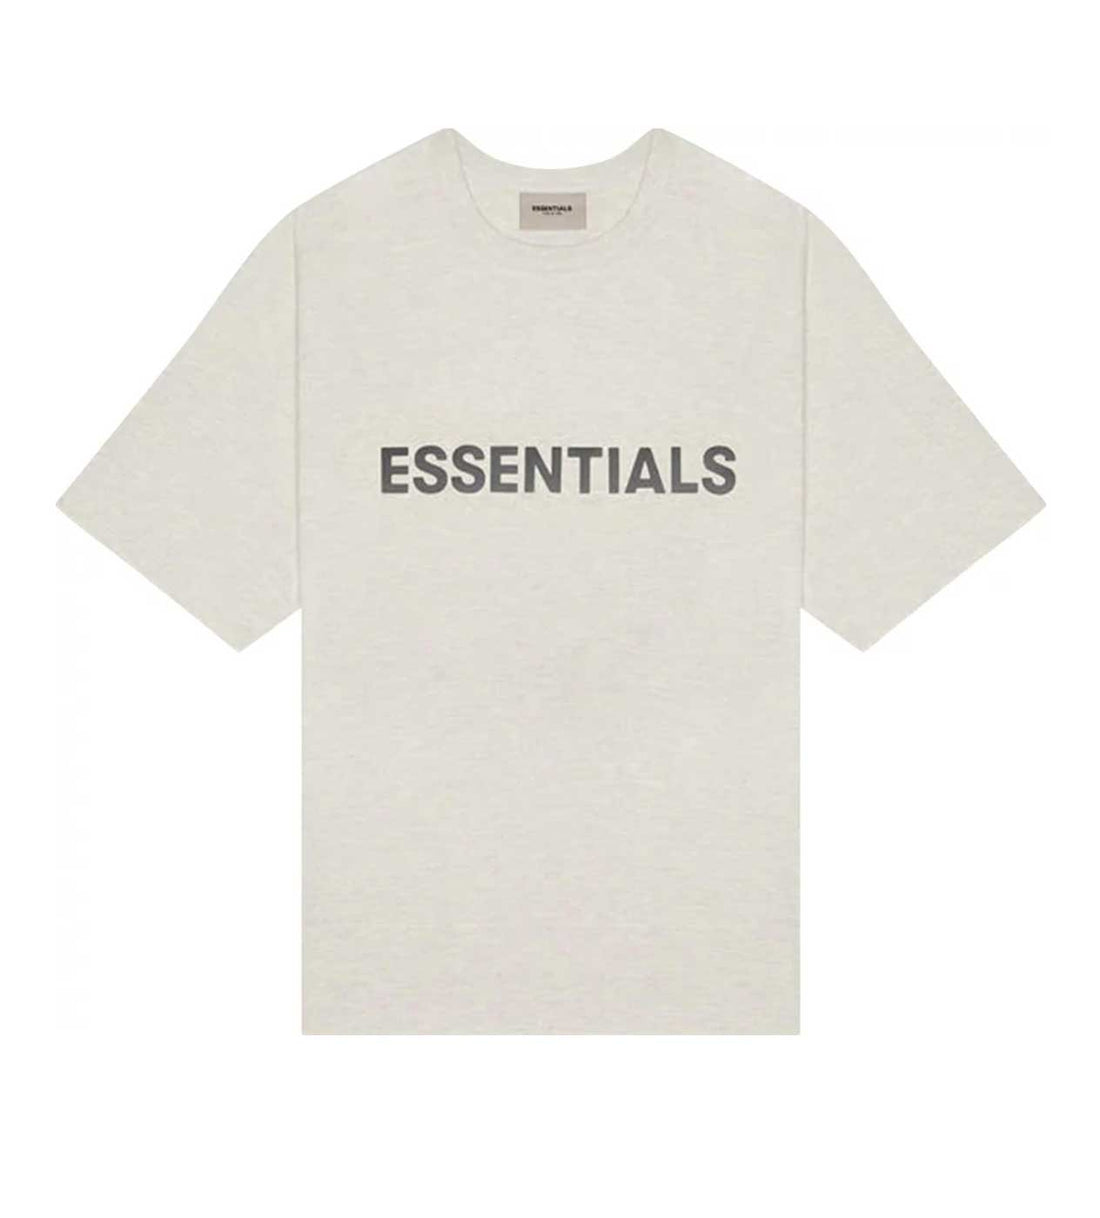 Essentials Oatmeal Tee Front Logo